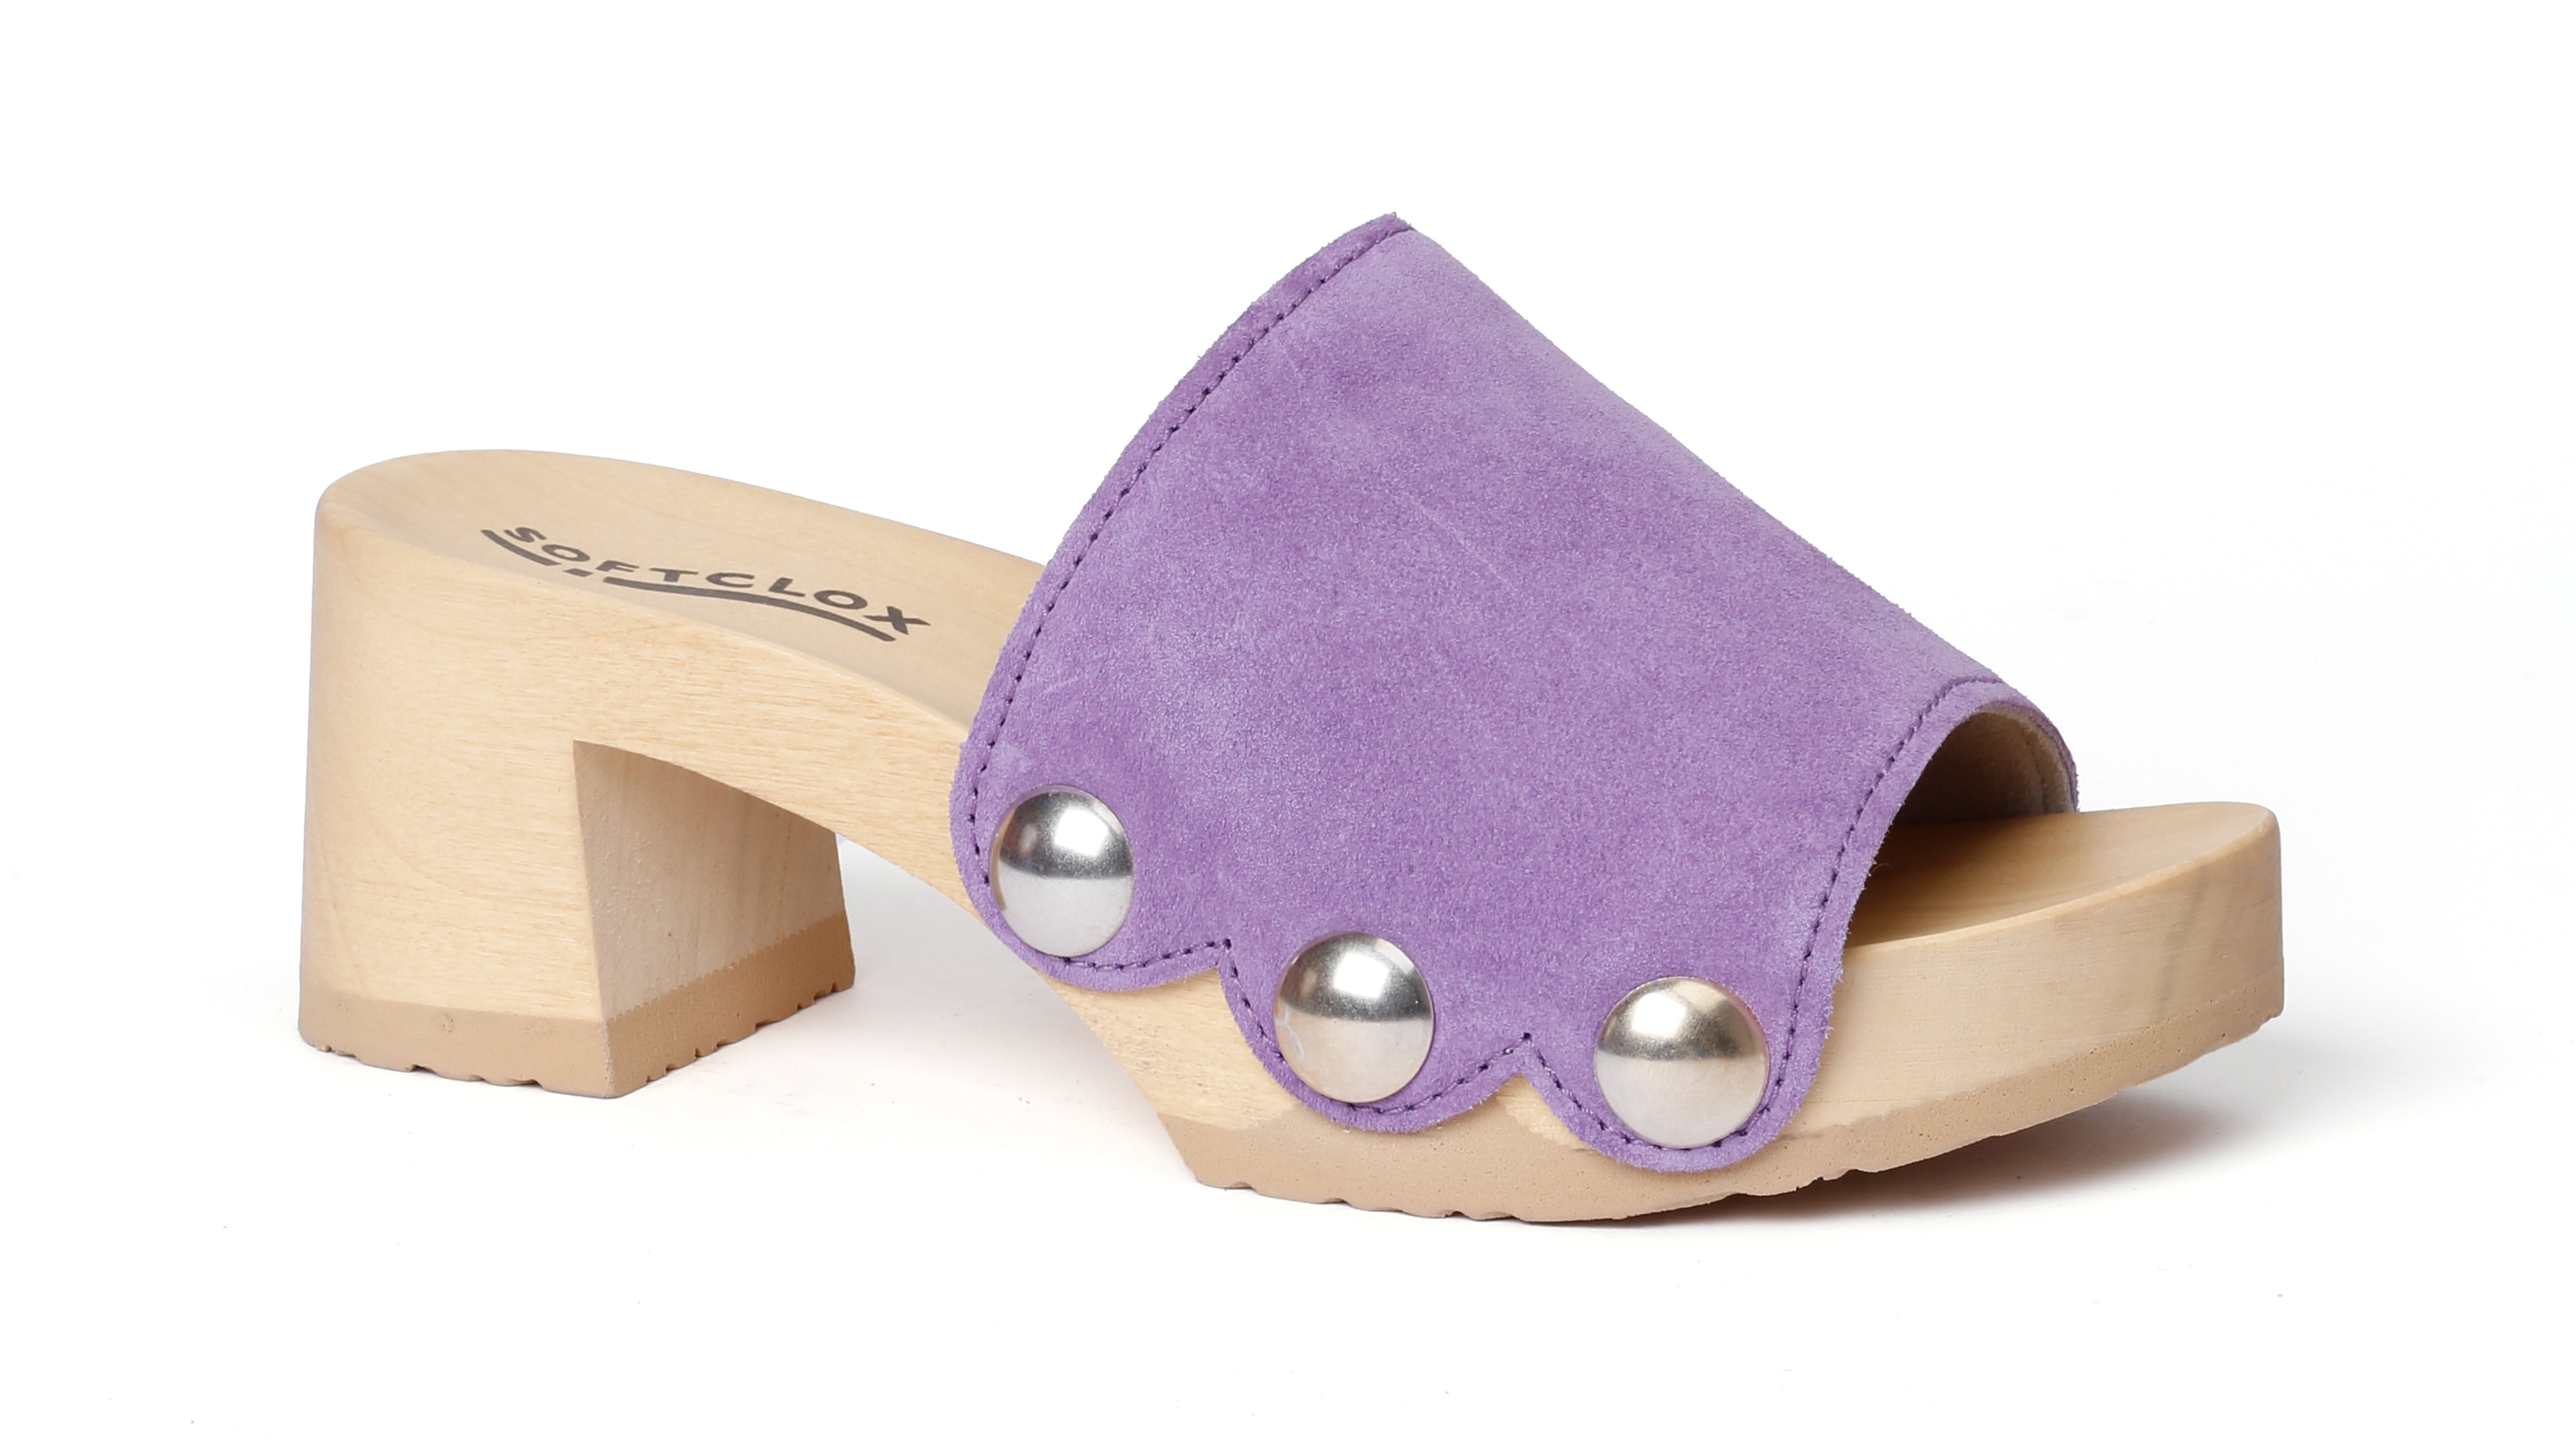 Shoe mule, smooth suede, poplar wood, in color violet by Softclox